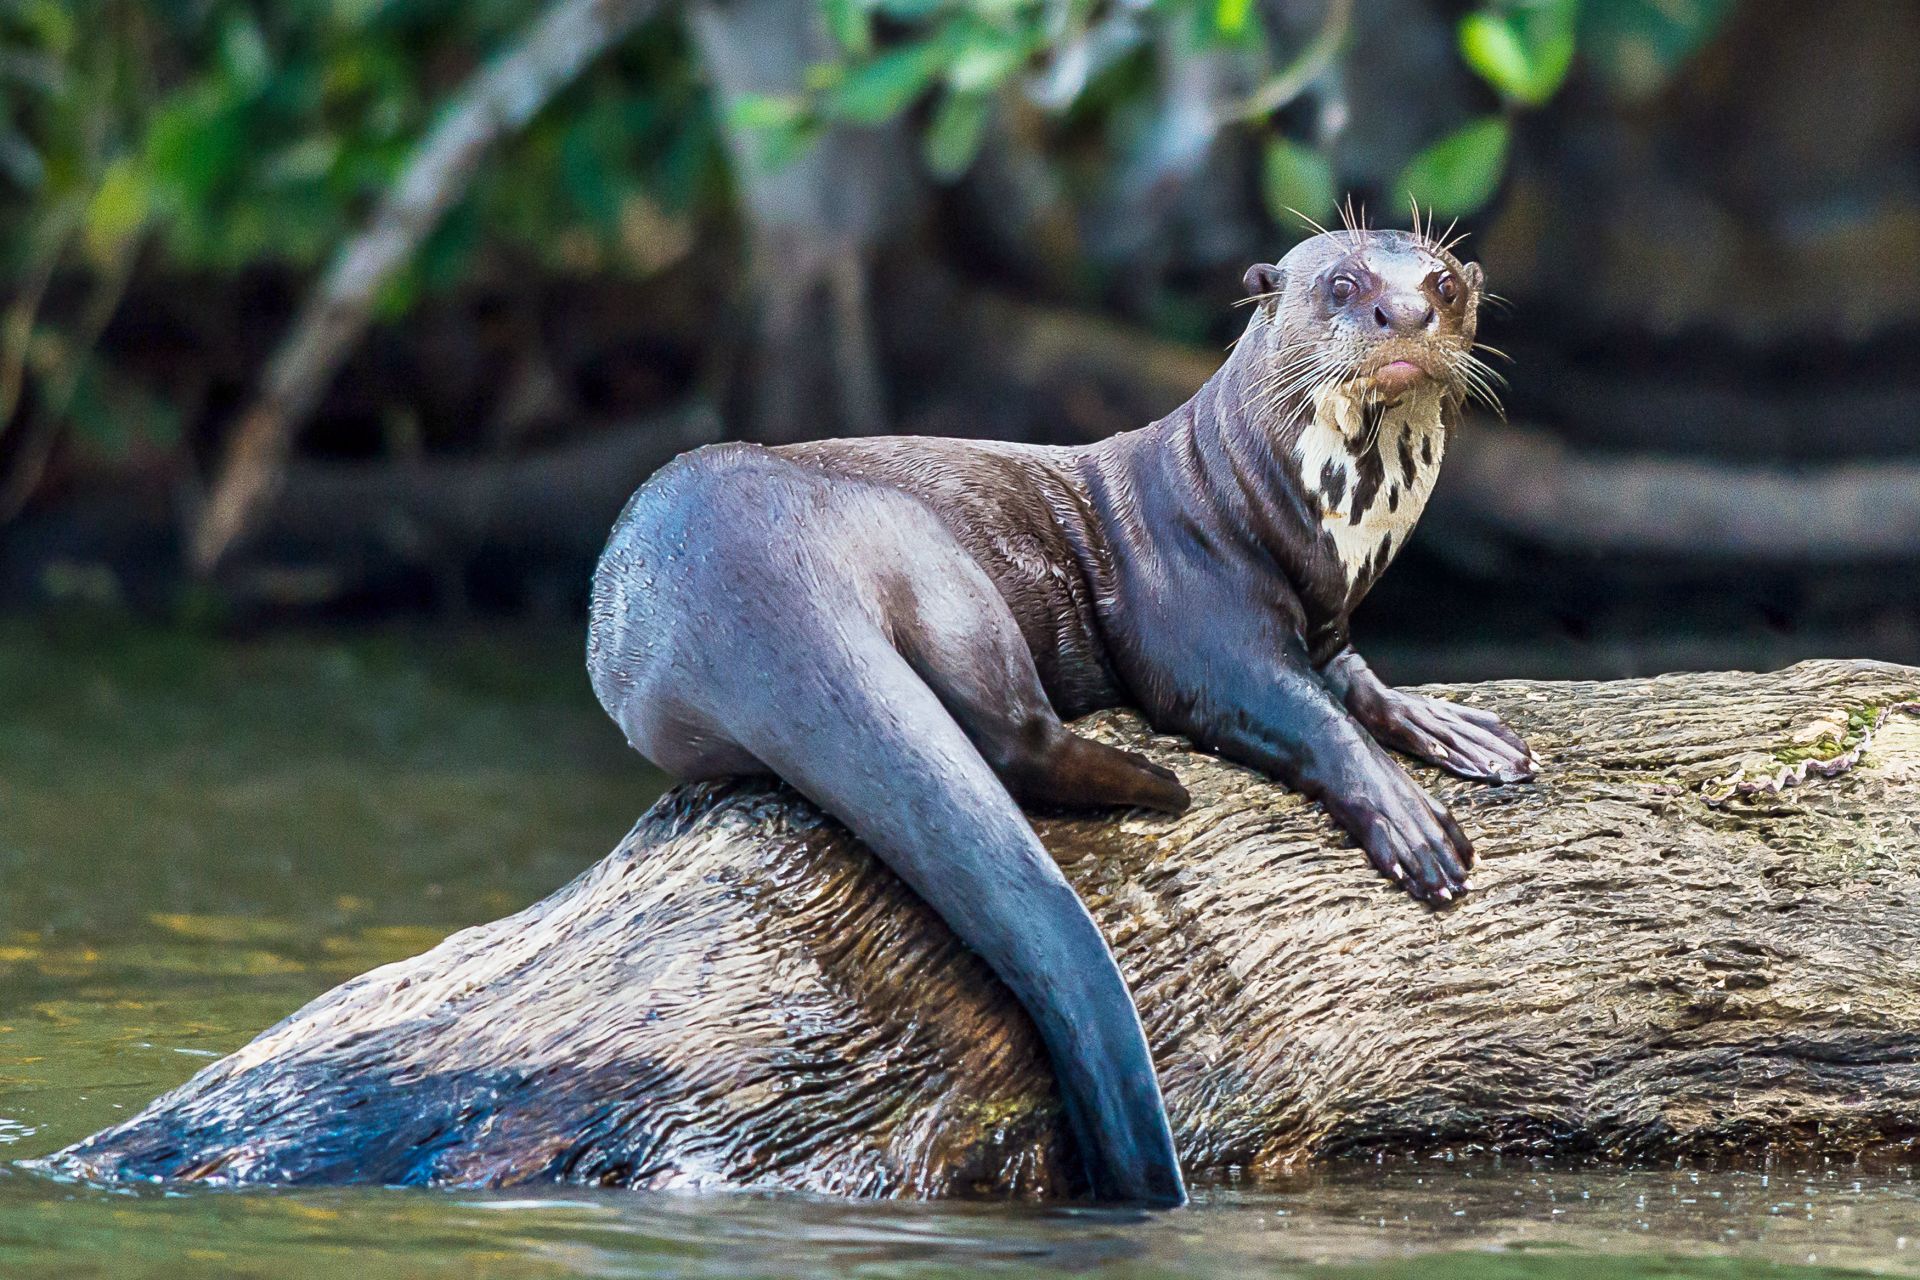 Giant River Otters | Giant Otter Facts | DK Find Out